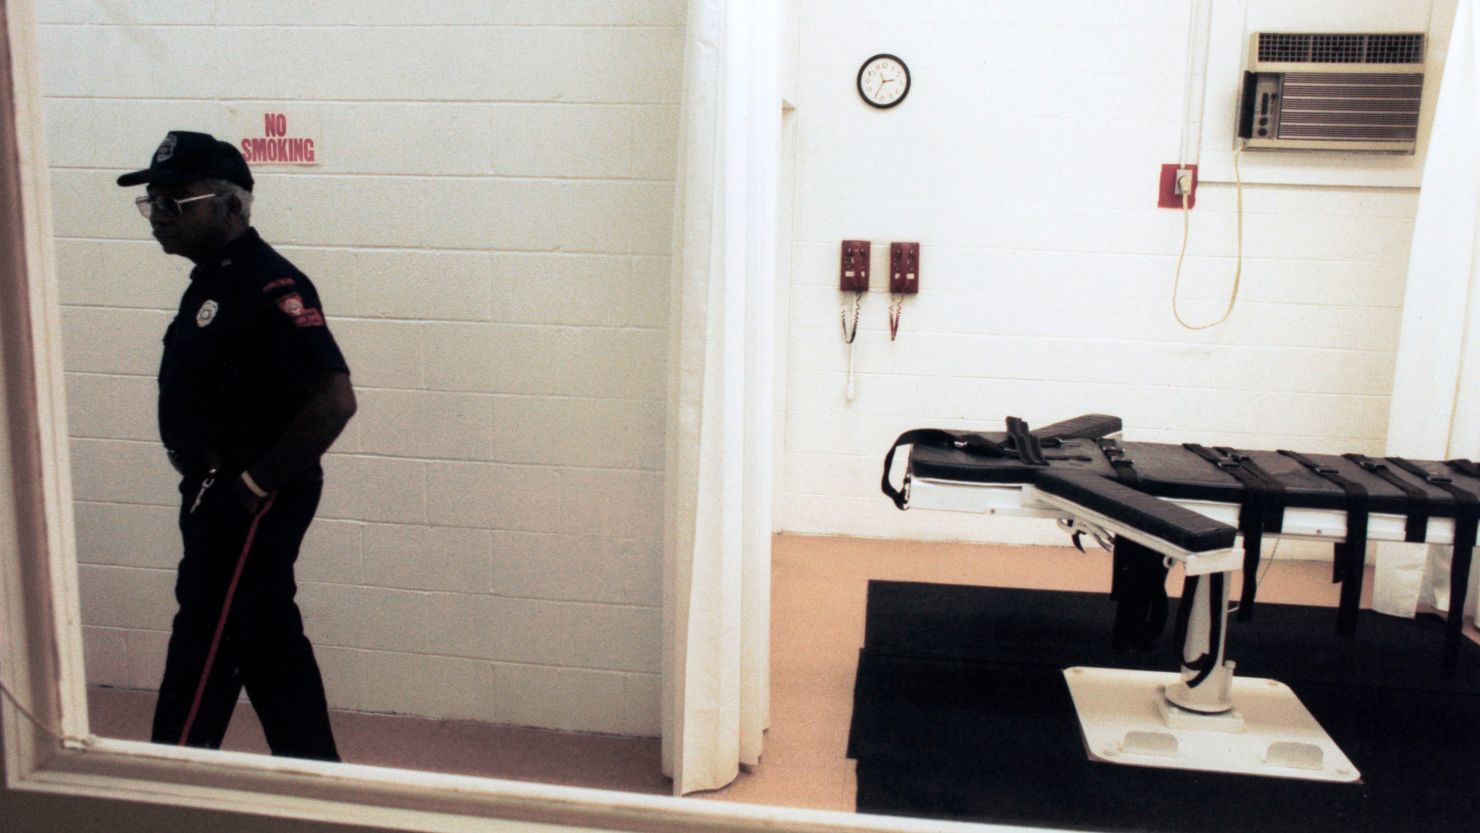 An image from January 1997 shows the gurney where lethal injection was administered in the execution chamber at the Louisiana State Penitentiary.